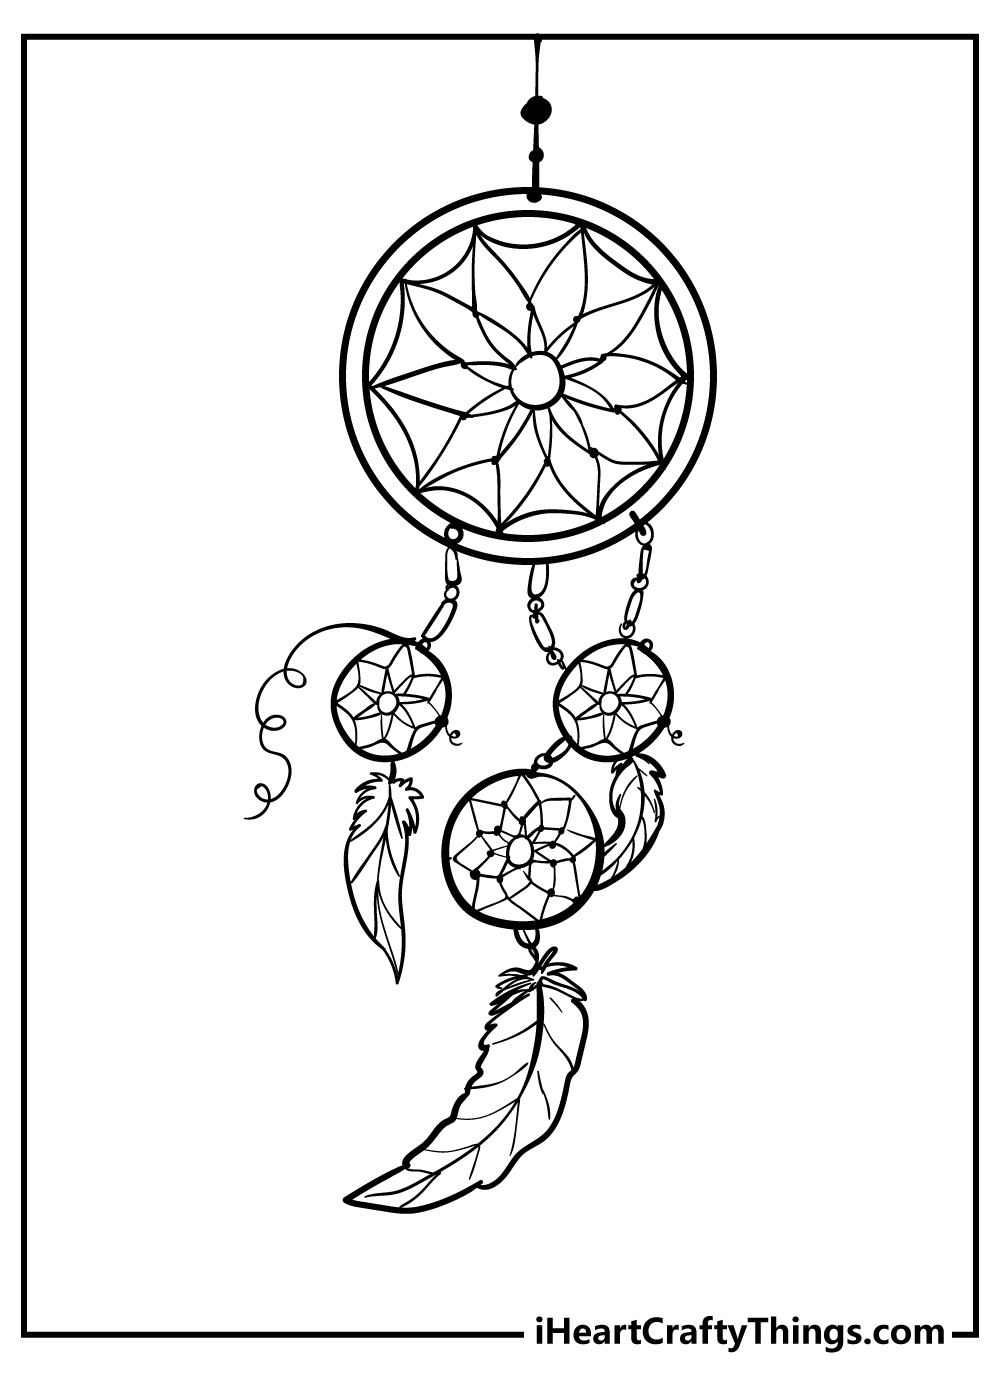 Dream Catcher Coloring Book free printable